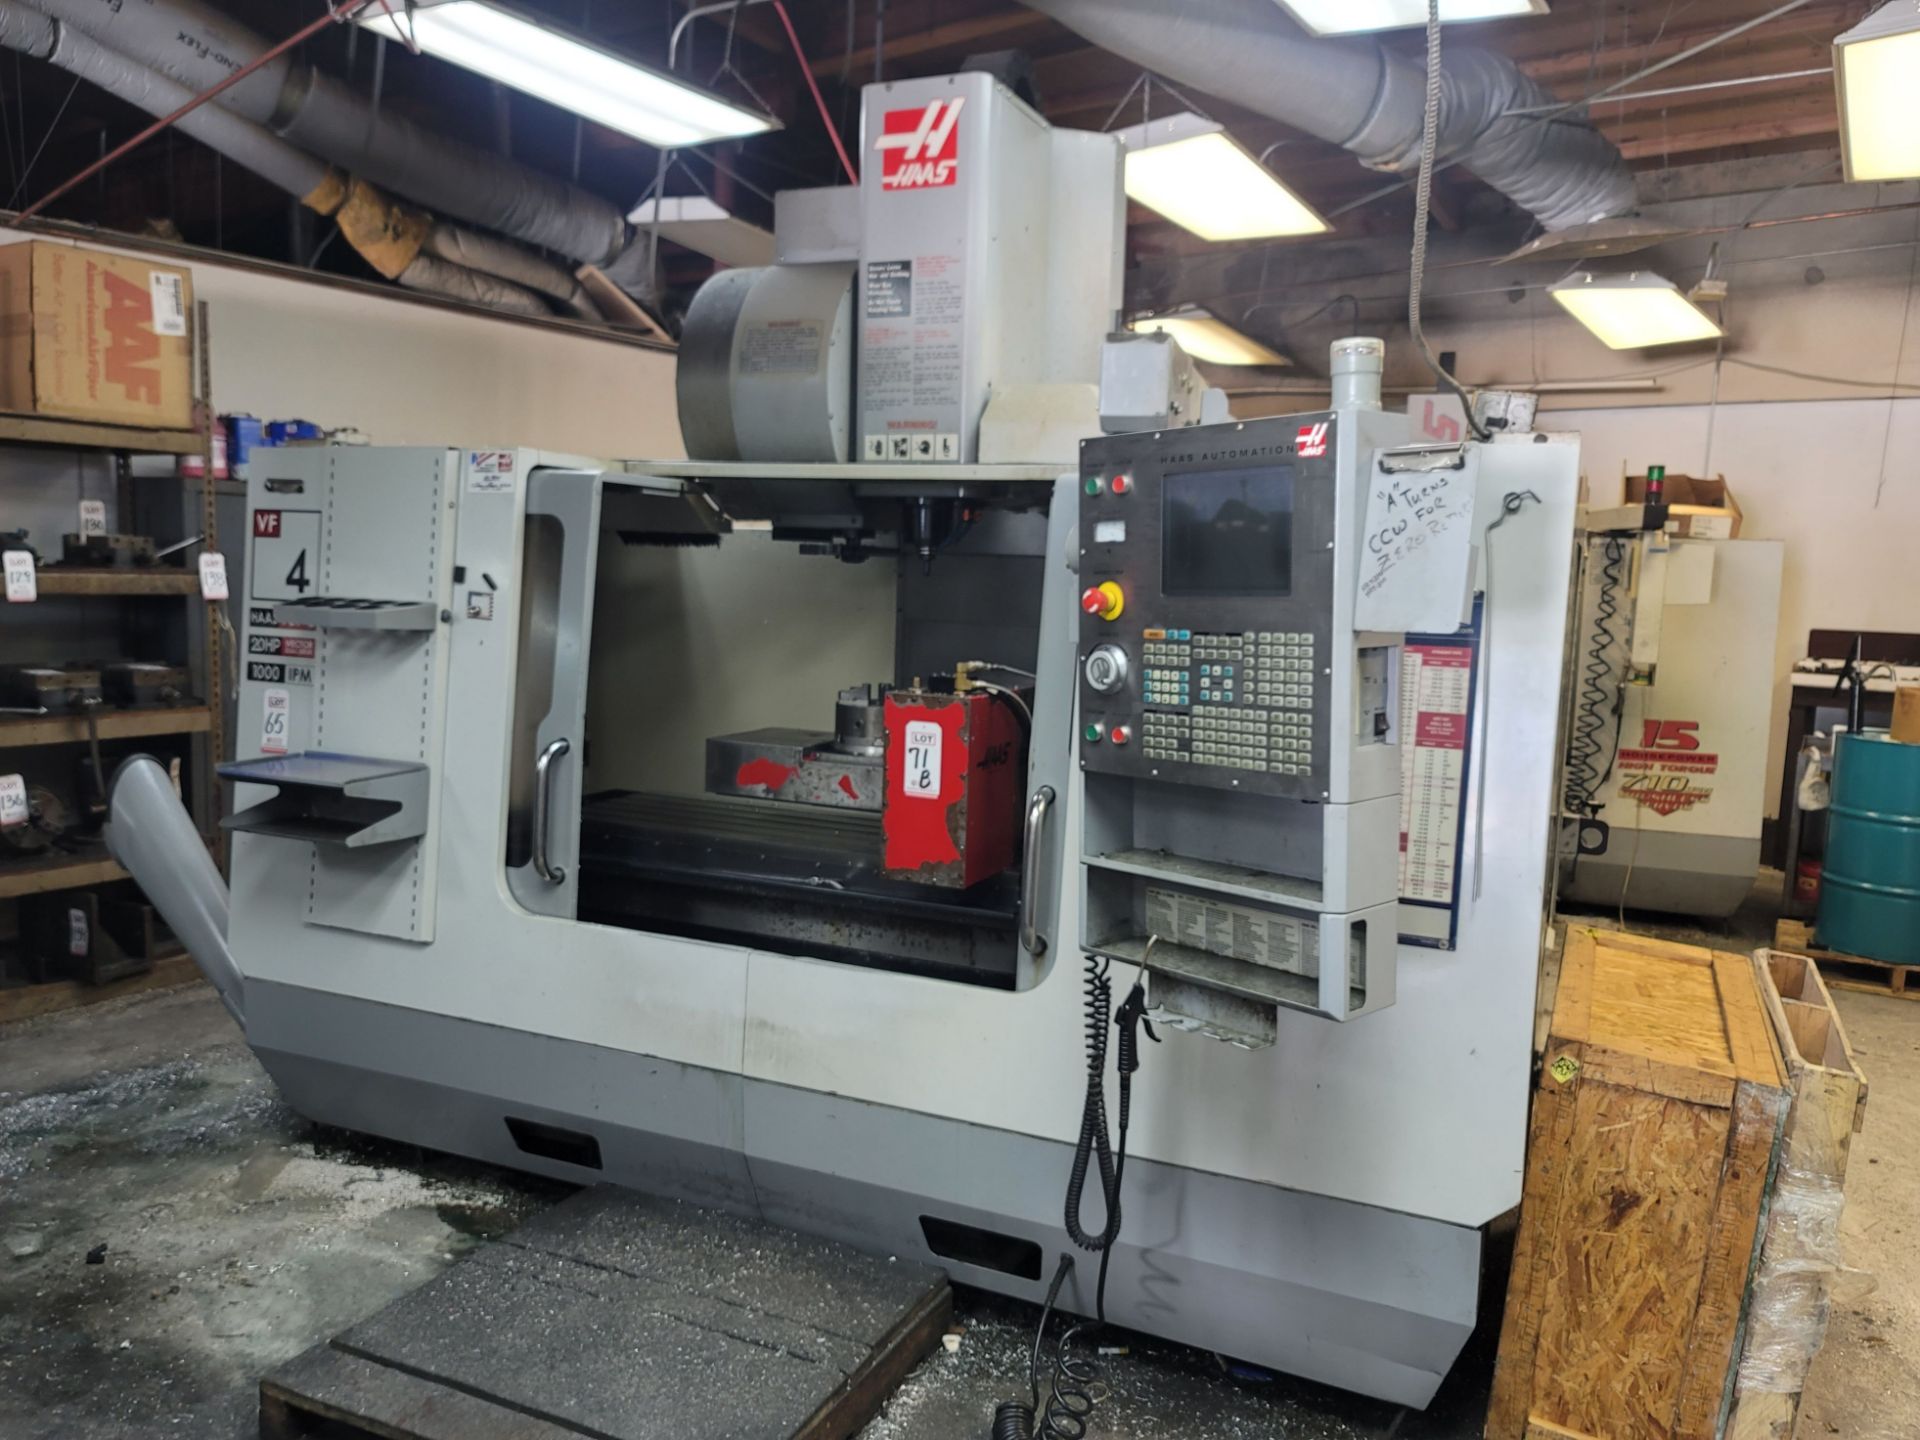 2006 HAAS VF-4D VERTICAL MACHINING CENTER, XYZ TRAVELS: 50" X 20" X 25", 52" X 18" TABLE, 24 ATC, - Image 2 of 8